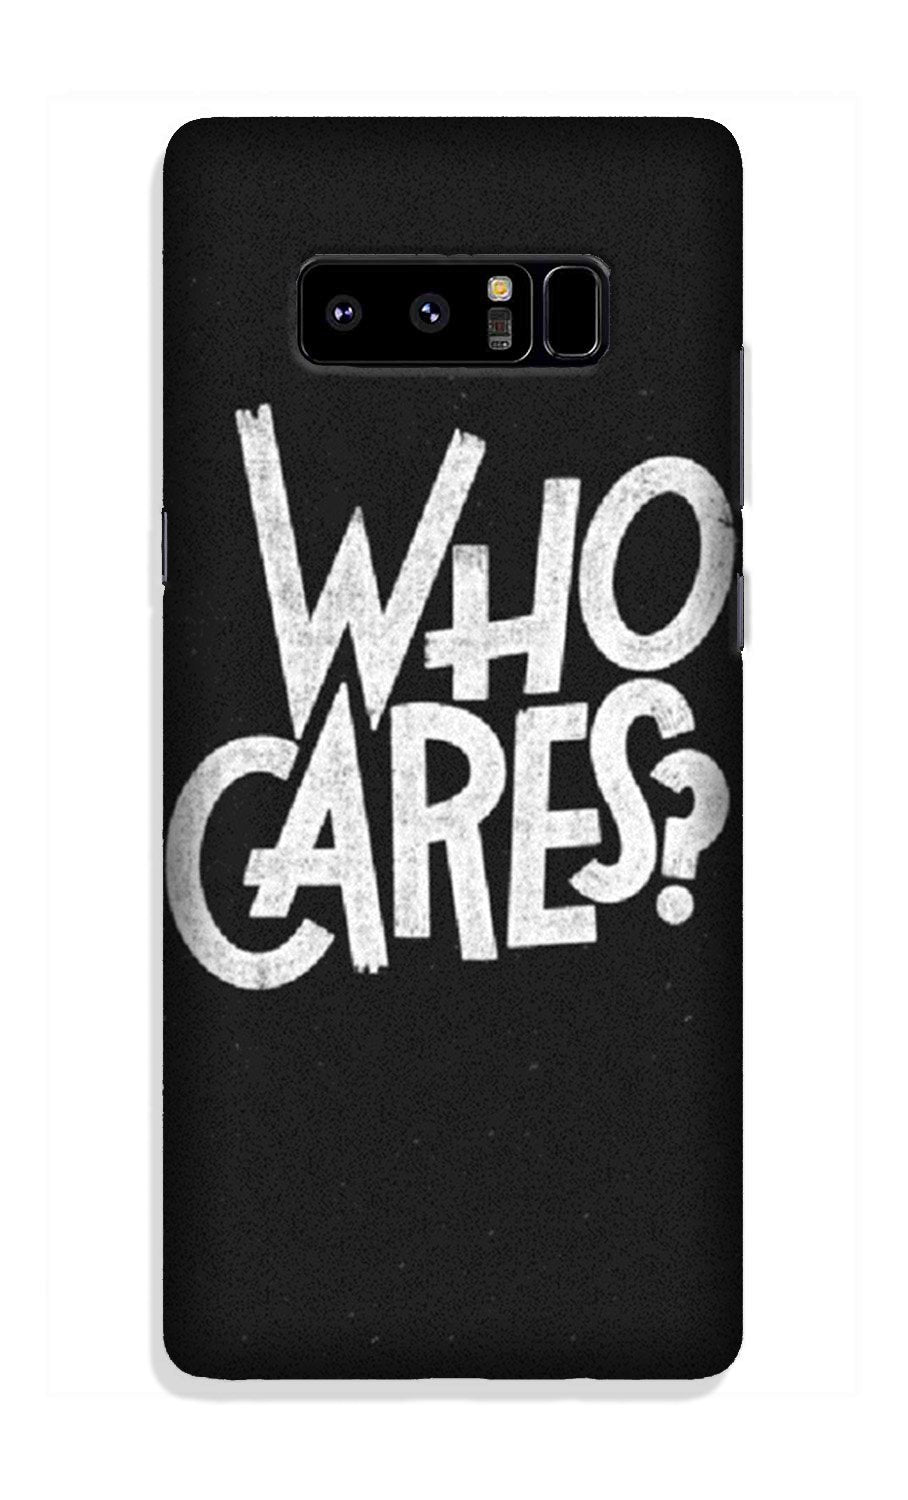 Who Cares Case for Galaxy Note 8